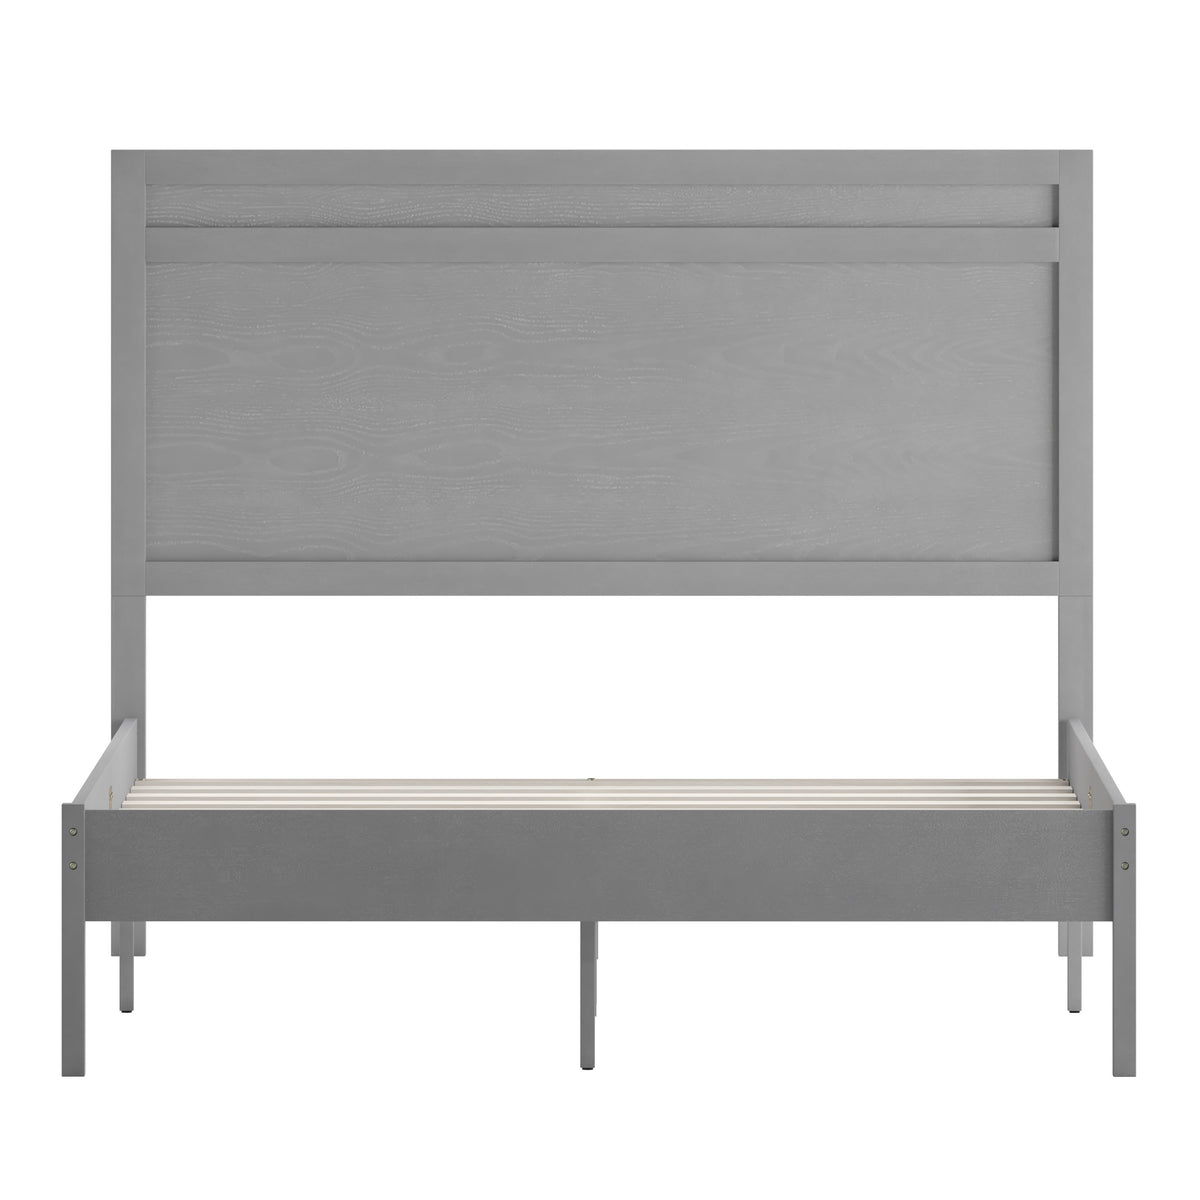 Gray,Full |#| Solid Wood Platform Bed with Headboard and Wooden Slats in Gray - Full